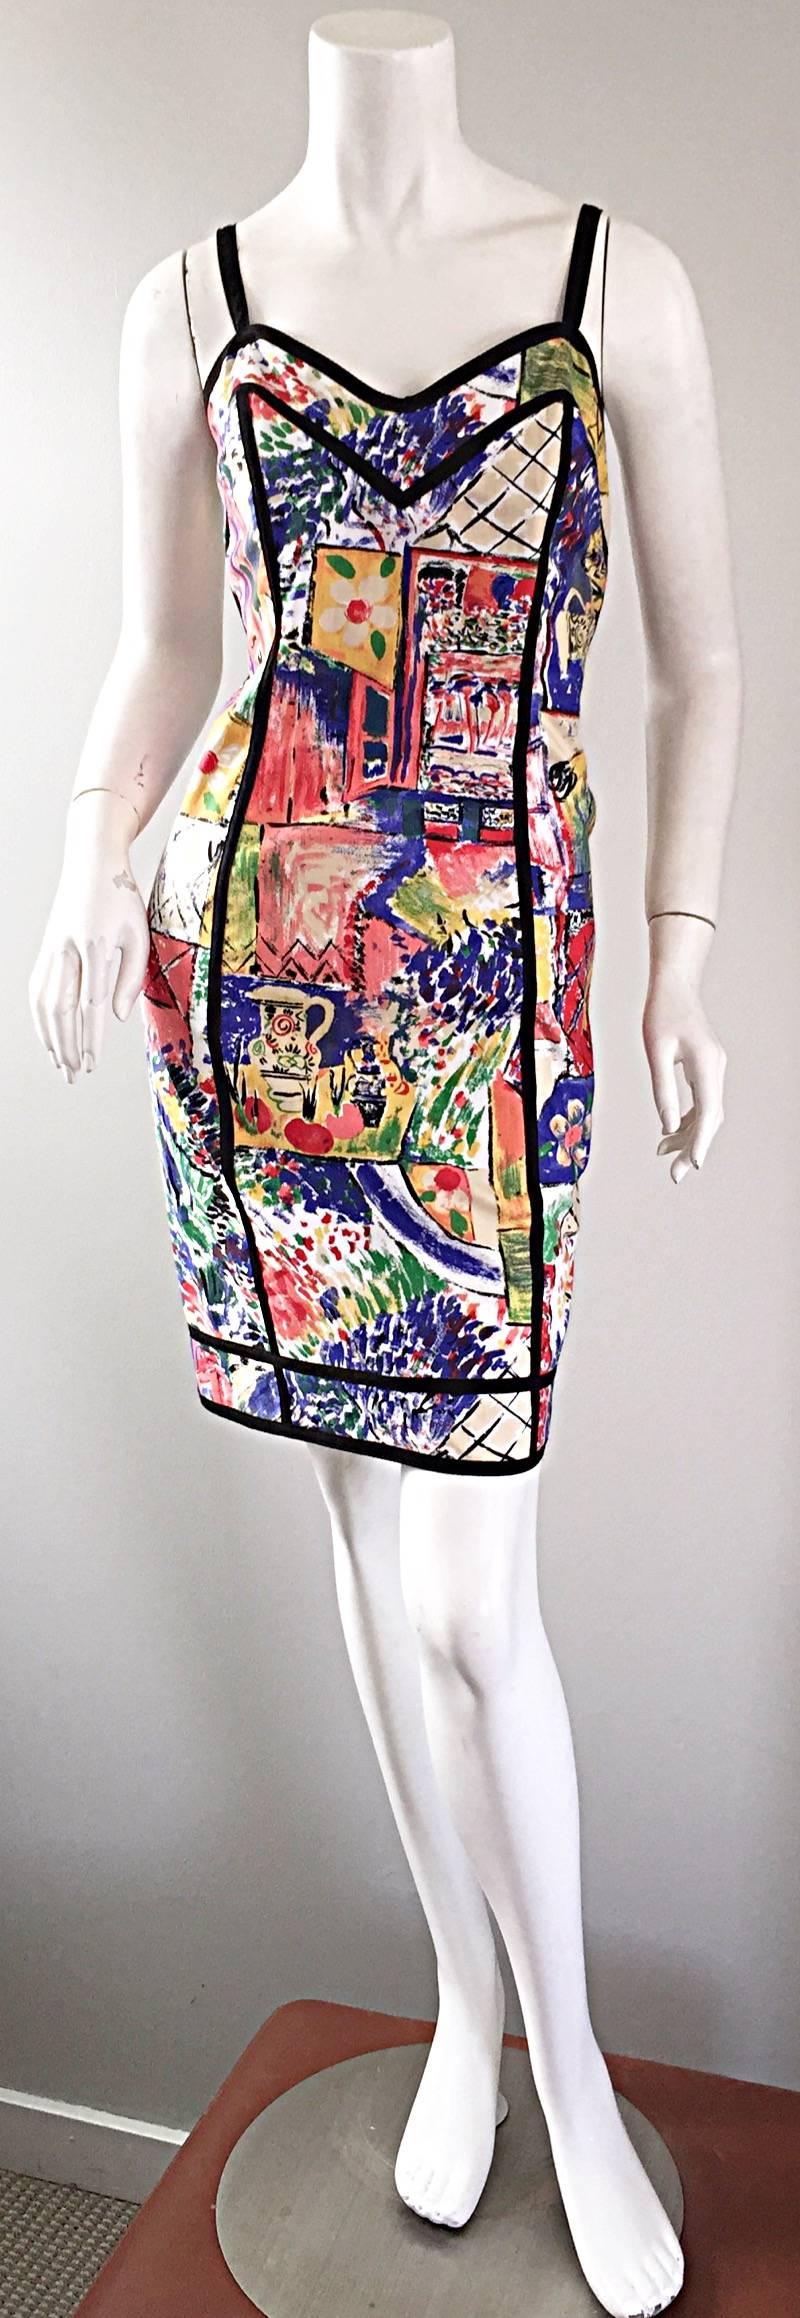 Statement worthy rare vintage 90s JAN BARBOGLIO handpainted cotton dress! Wonderful constructed, with a heavy eye to details. Fully hand painted! Boned bodice is very flattering, and keeps everything in place. Adjustable straps can be made shorter